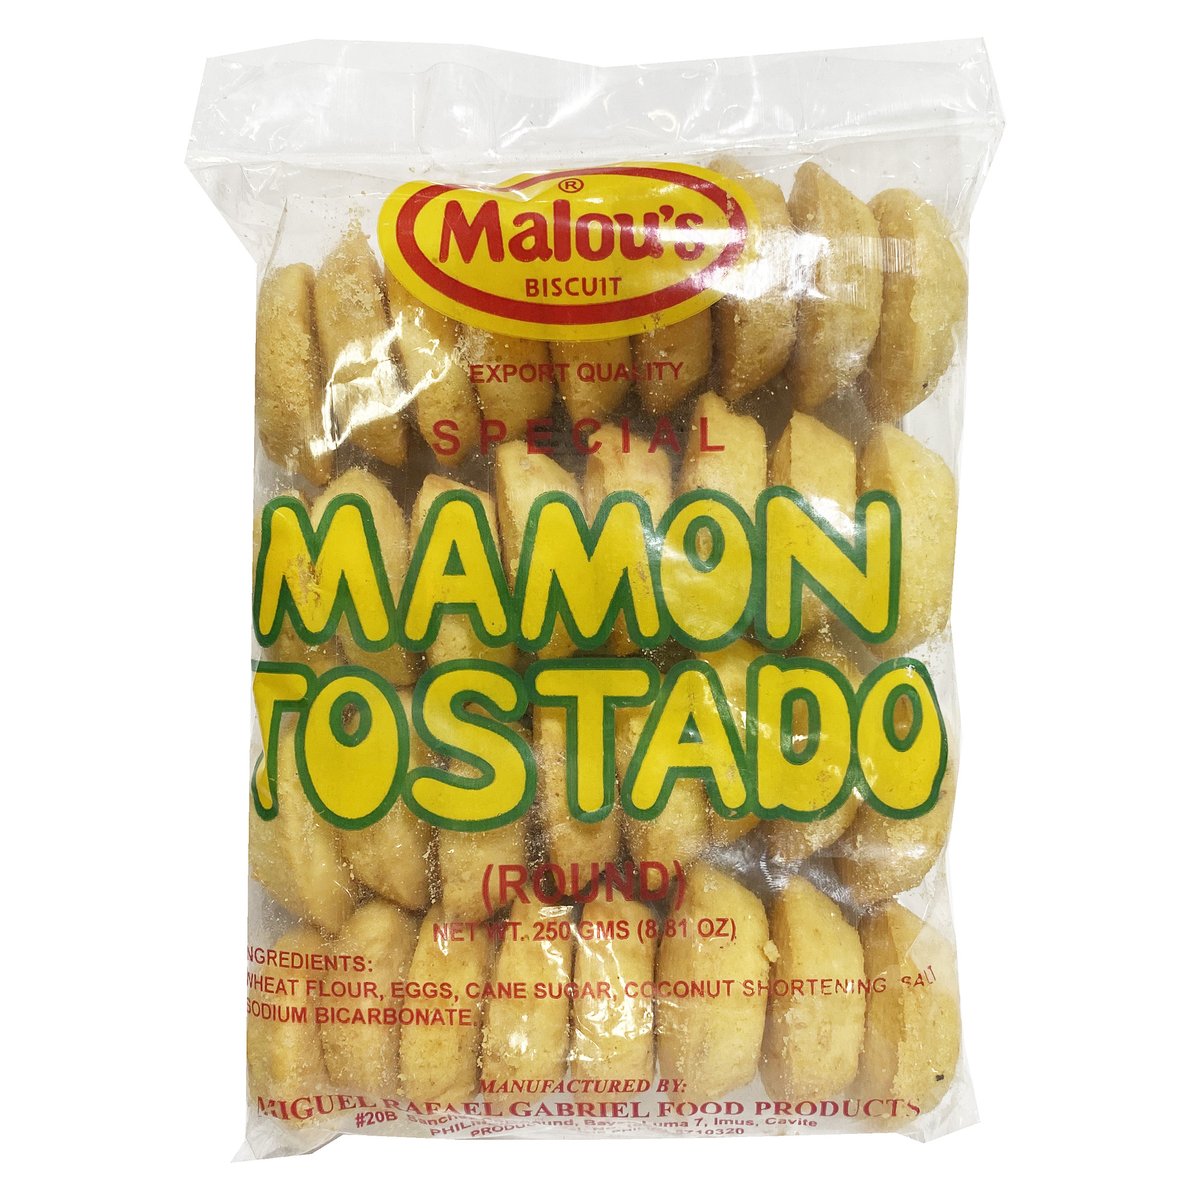 Malou's Biscuits Mamon Tostado